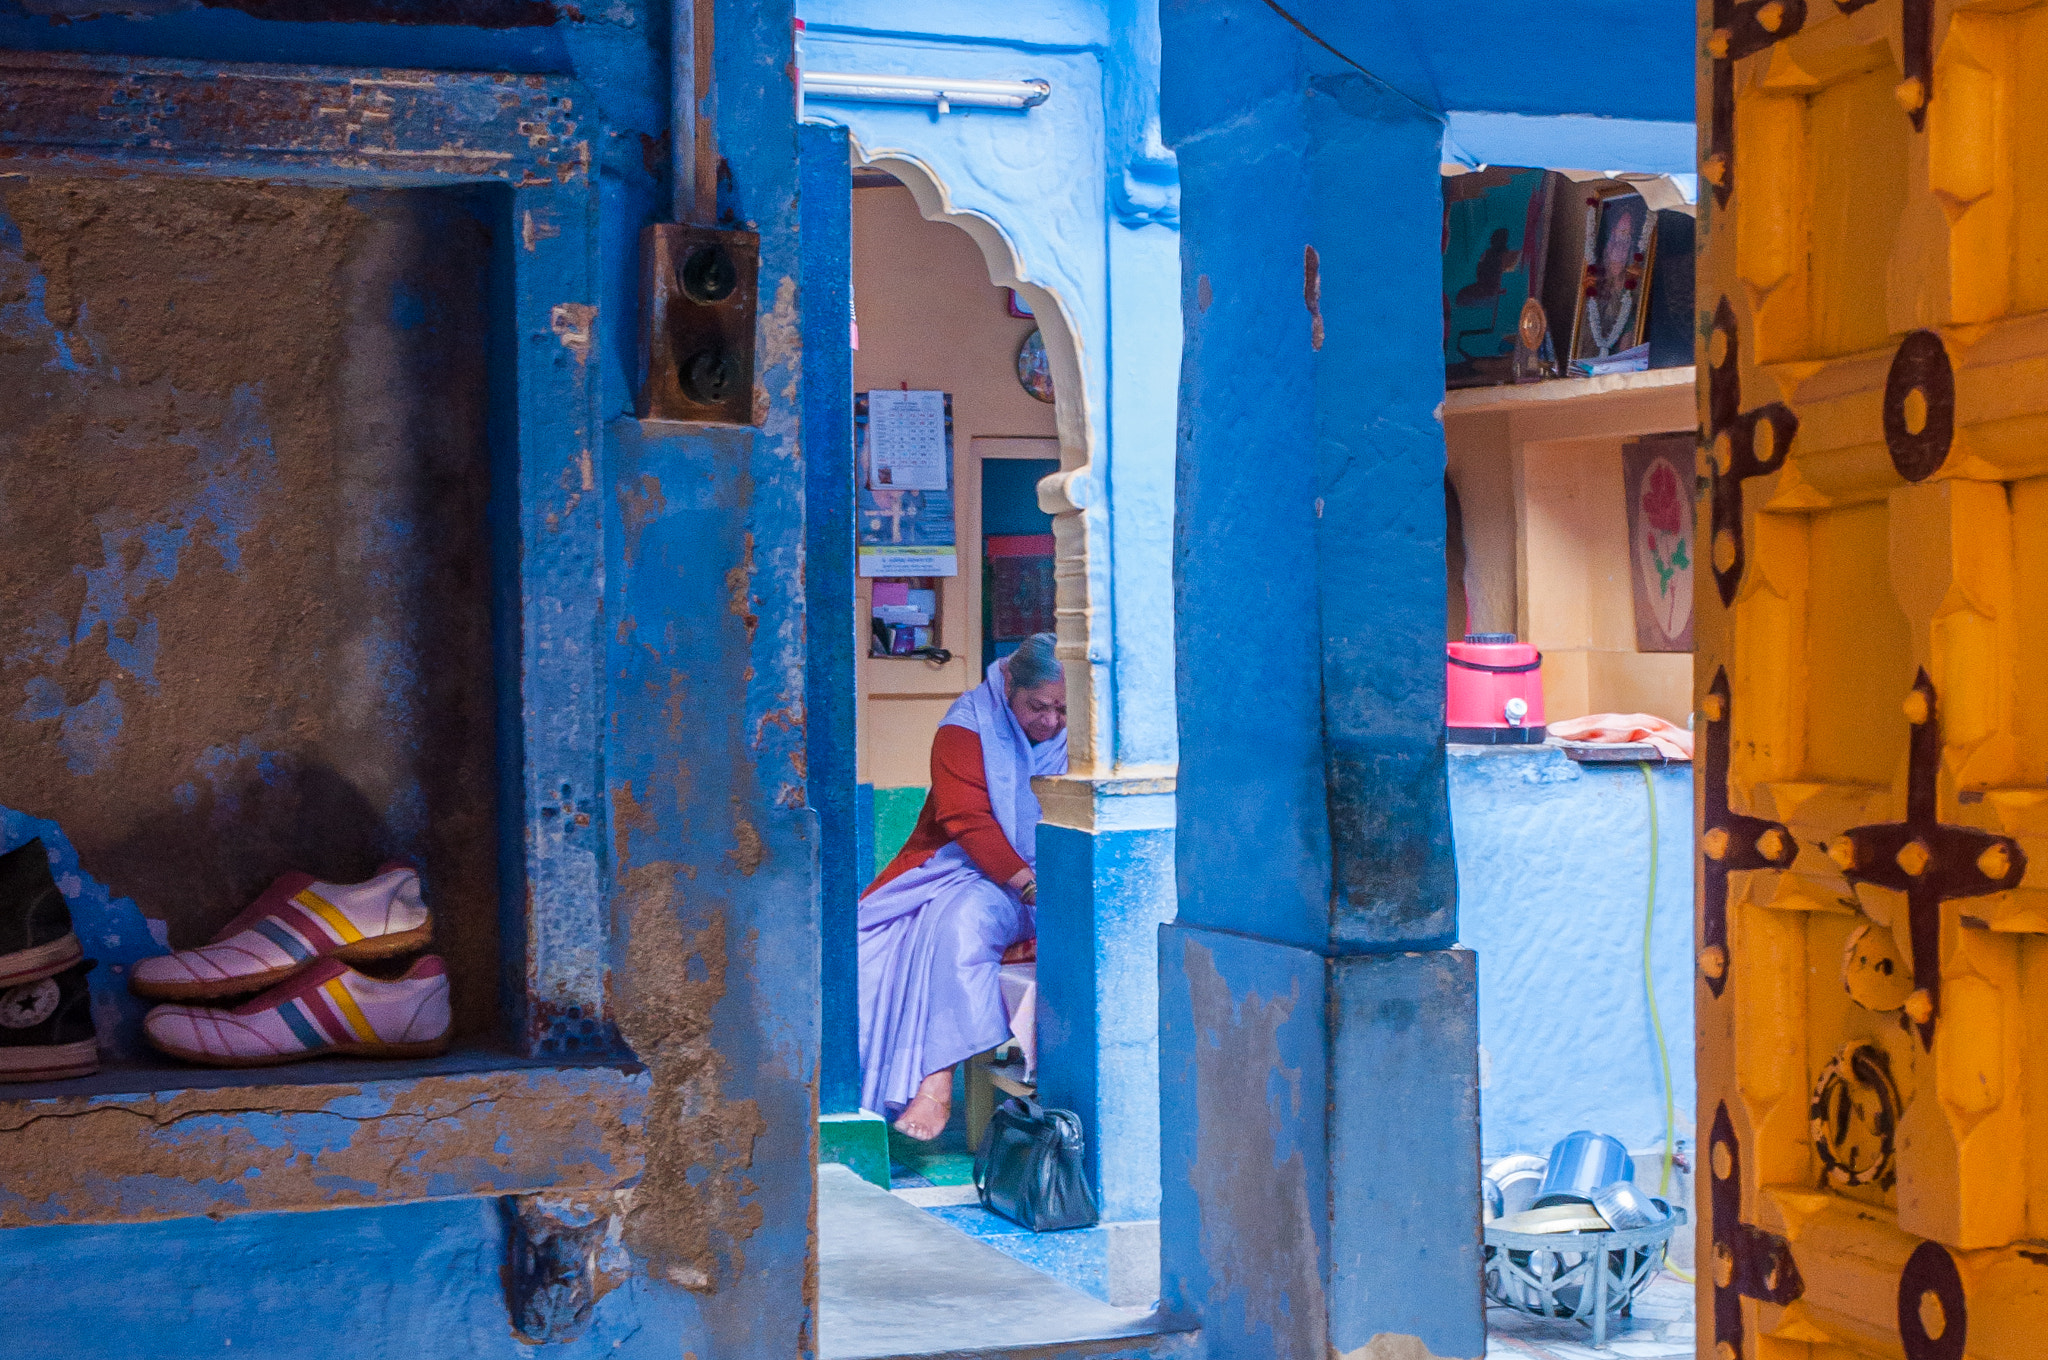 Nikon D90 + Tamron SP AF 17-50mm F2.8 XR Di II VC LD Aspherical (IF) sample photo. Indian home in the blue city of jodhpur, india photography